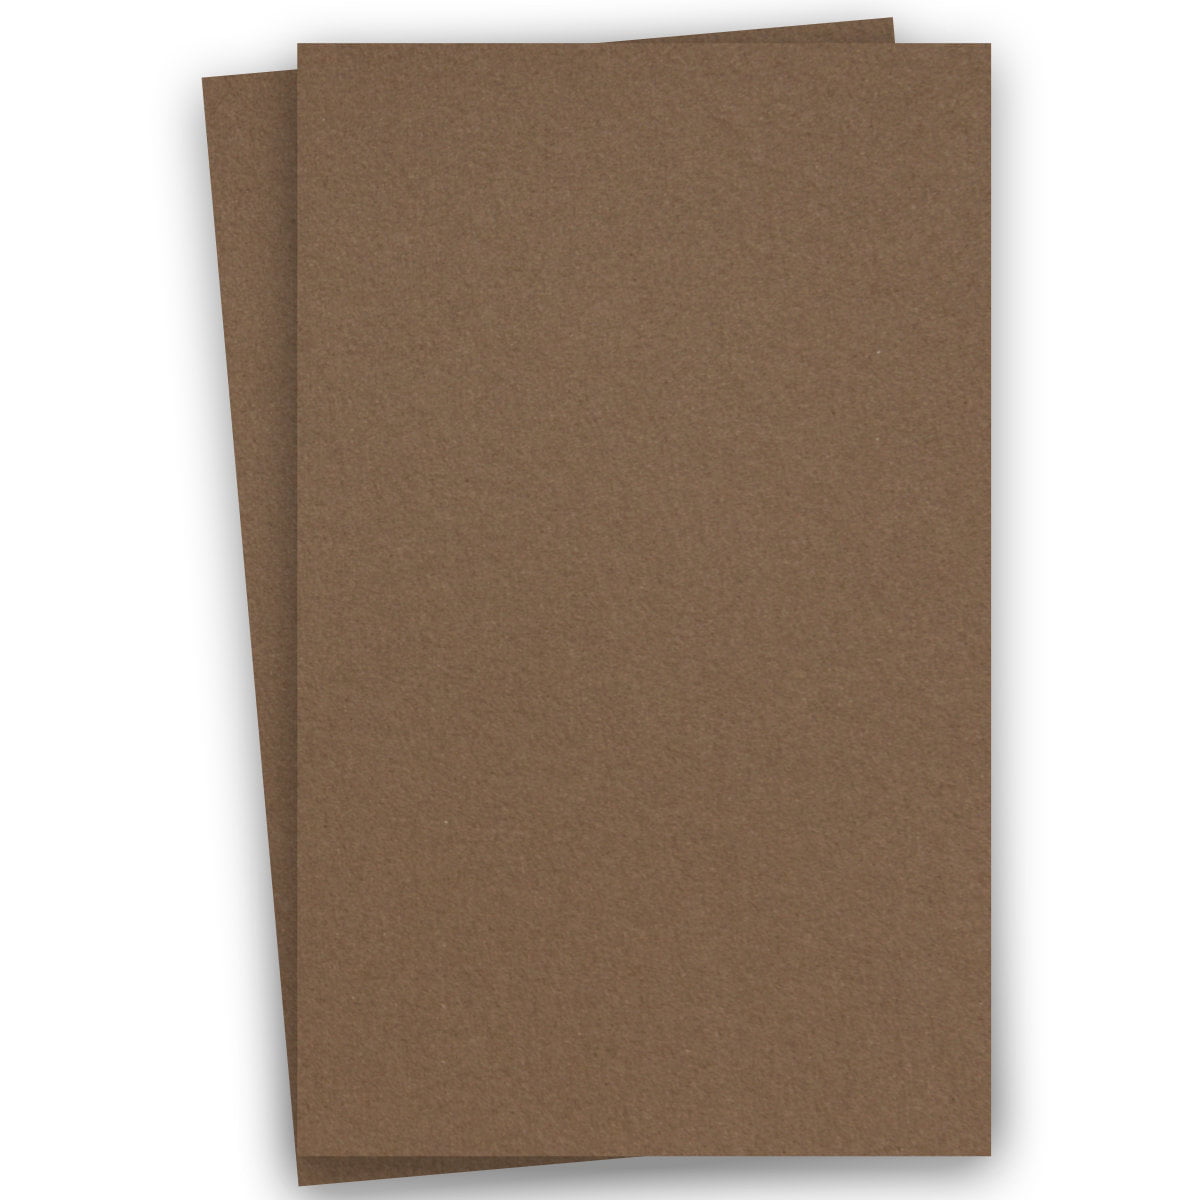 CRUSH 11X17 Ledger Size Earthfriendly CARDSTOCK Paper Recycled Cover Paper 92C Card Stock